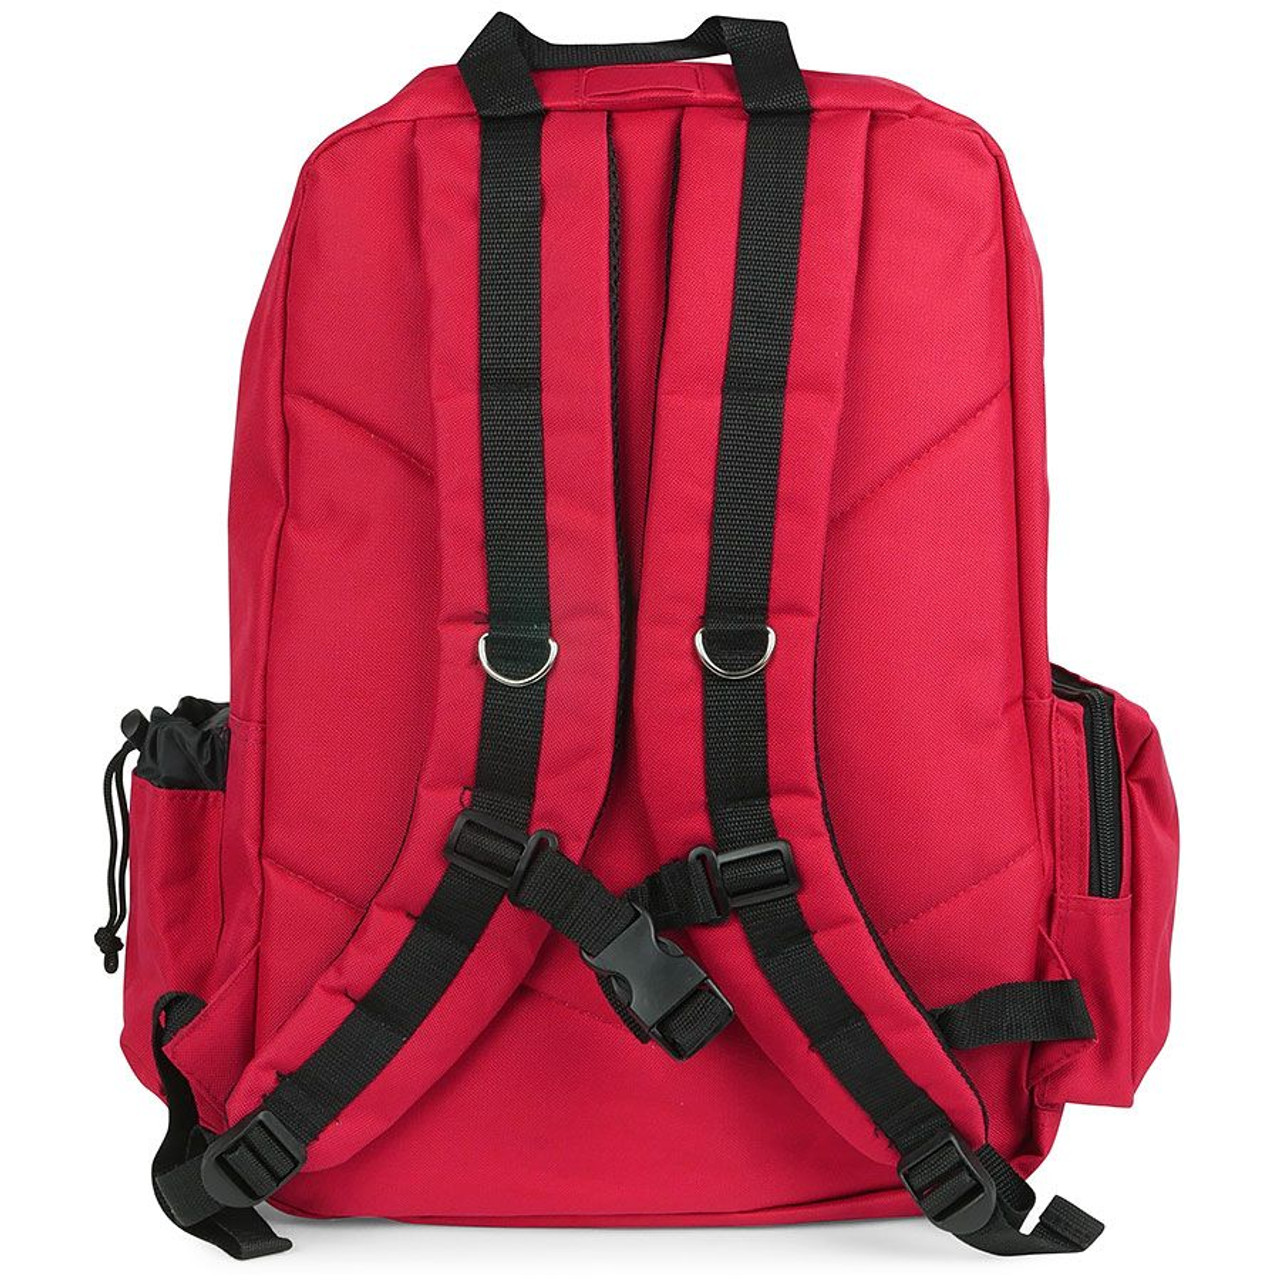 Deluxe Reponder Red Backpack - Emergency Survival Medical Response - Gear  Bag - Nylon - EMT Bags, Backpacks and First Aid Kit Containers